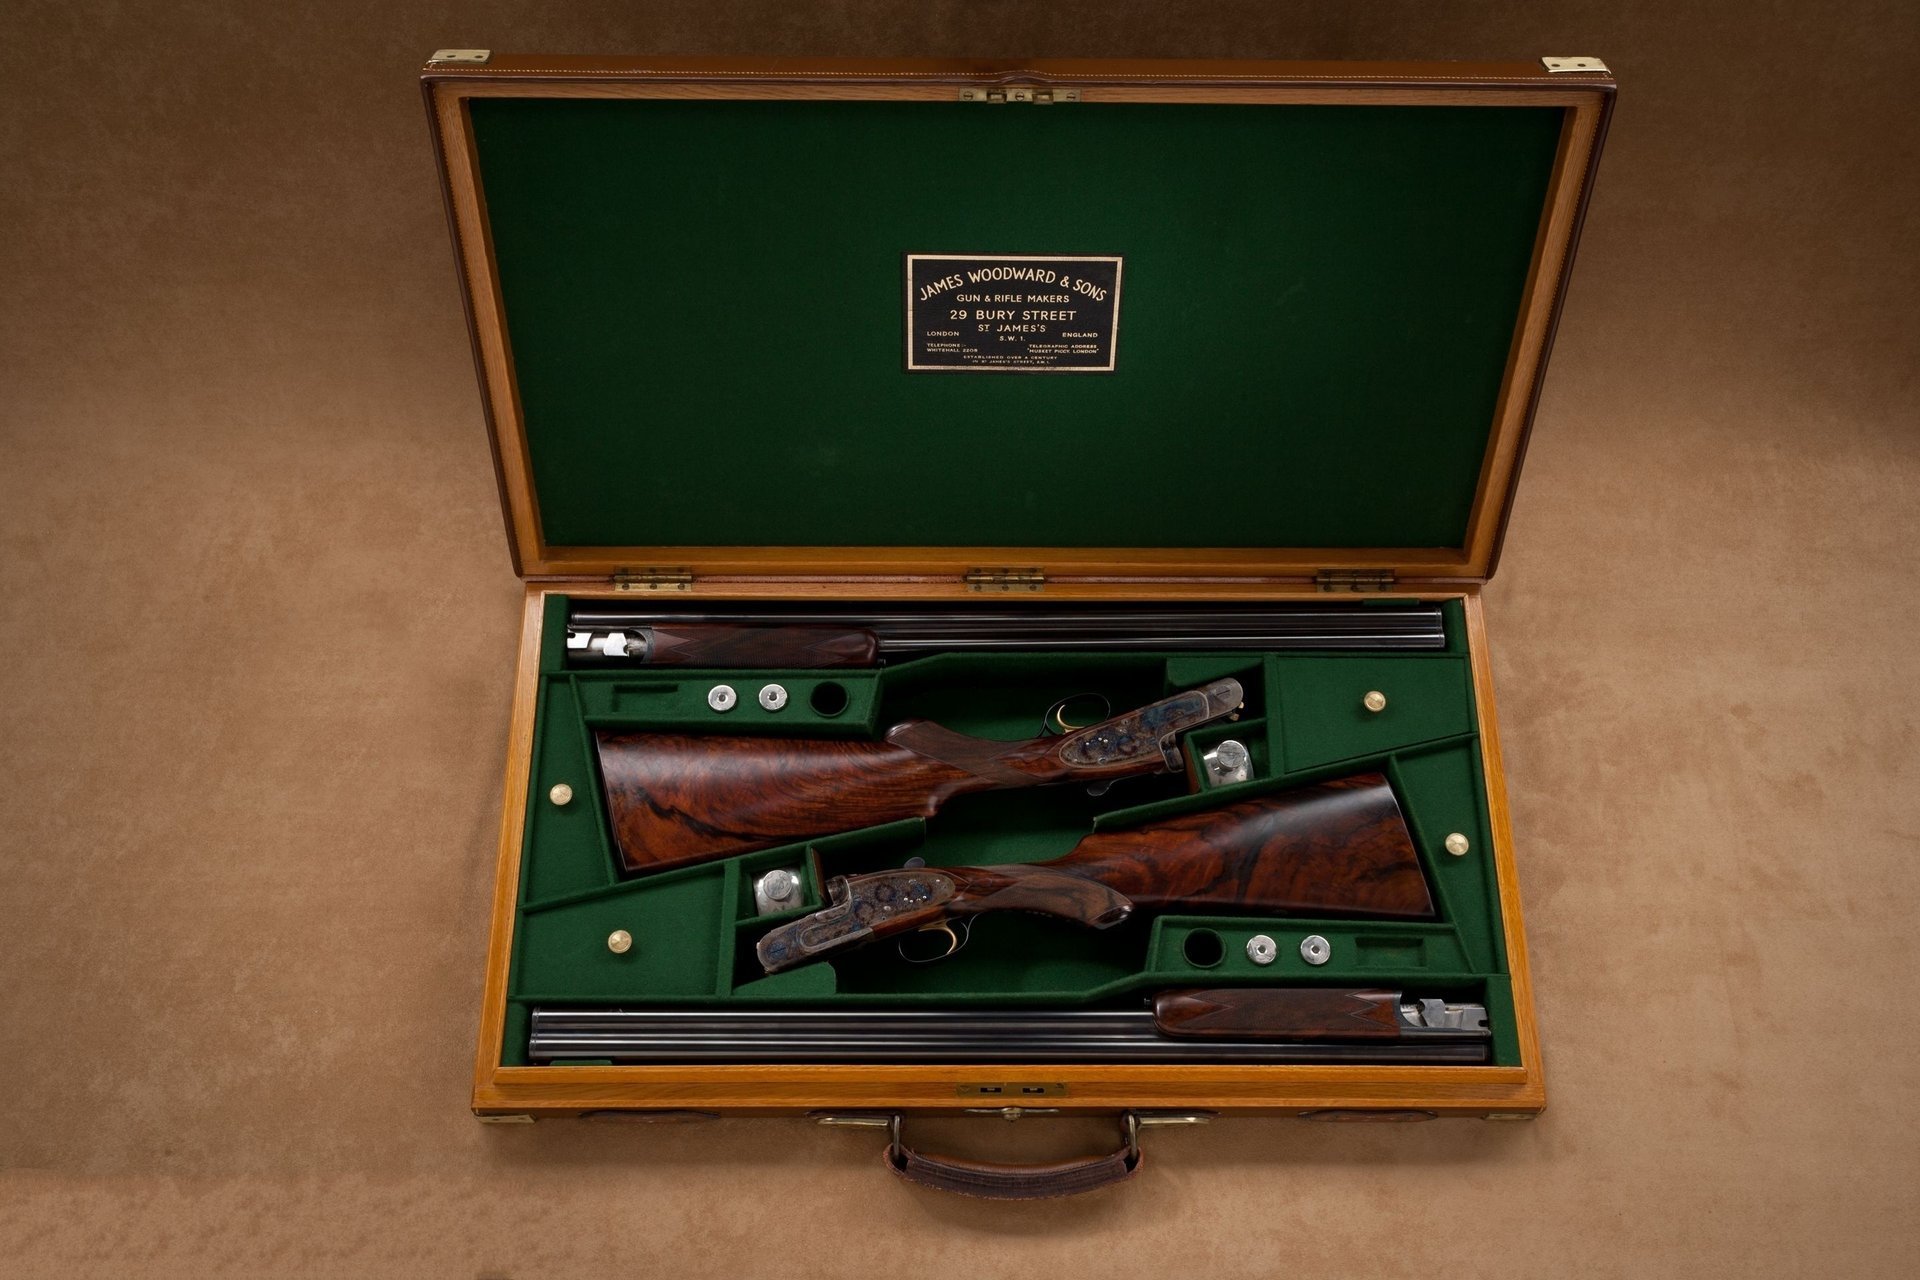 Hunting rifle in a green case